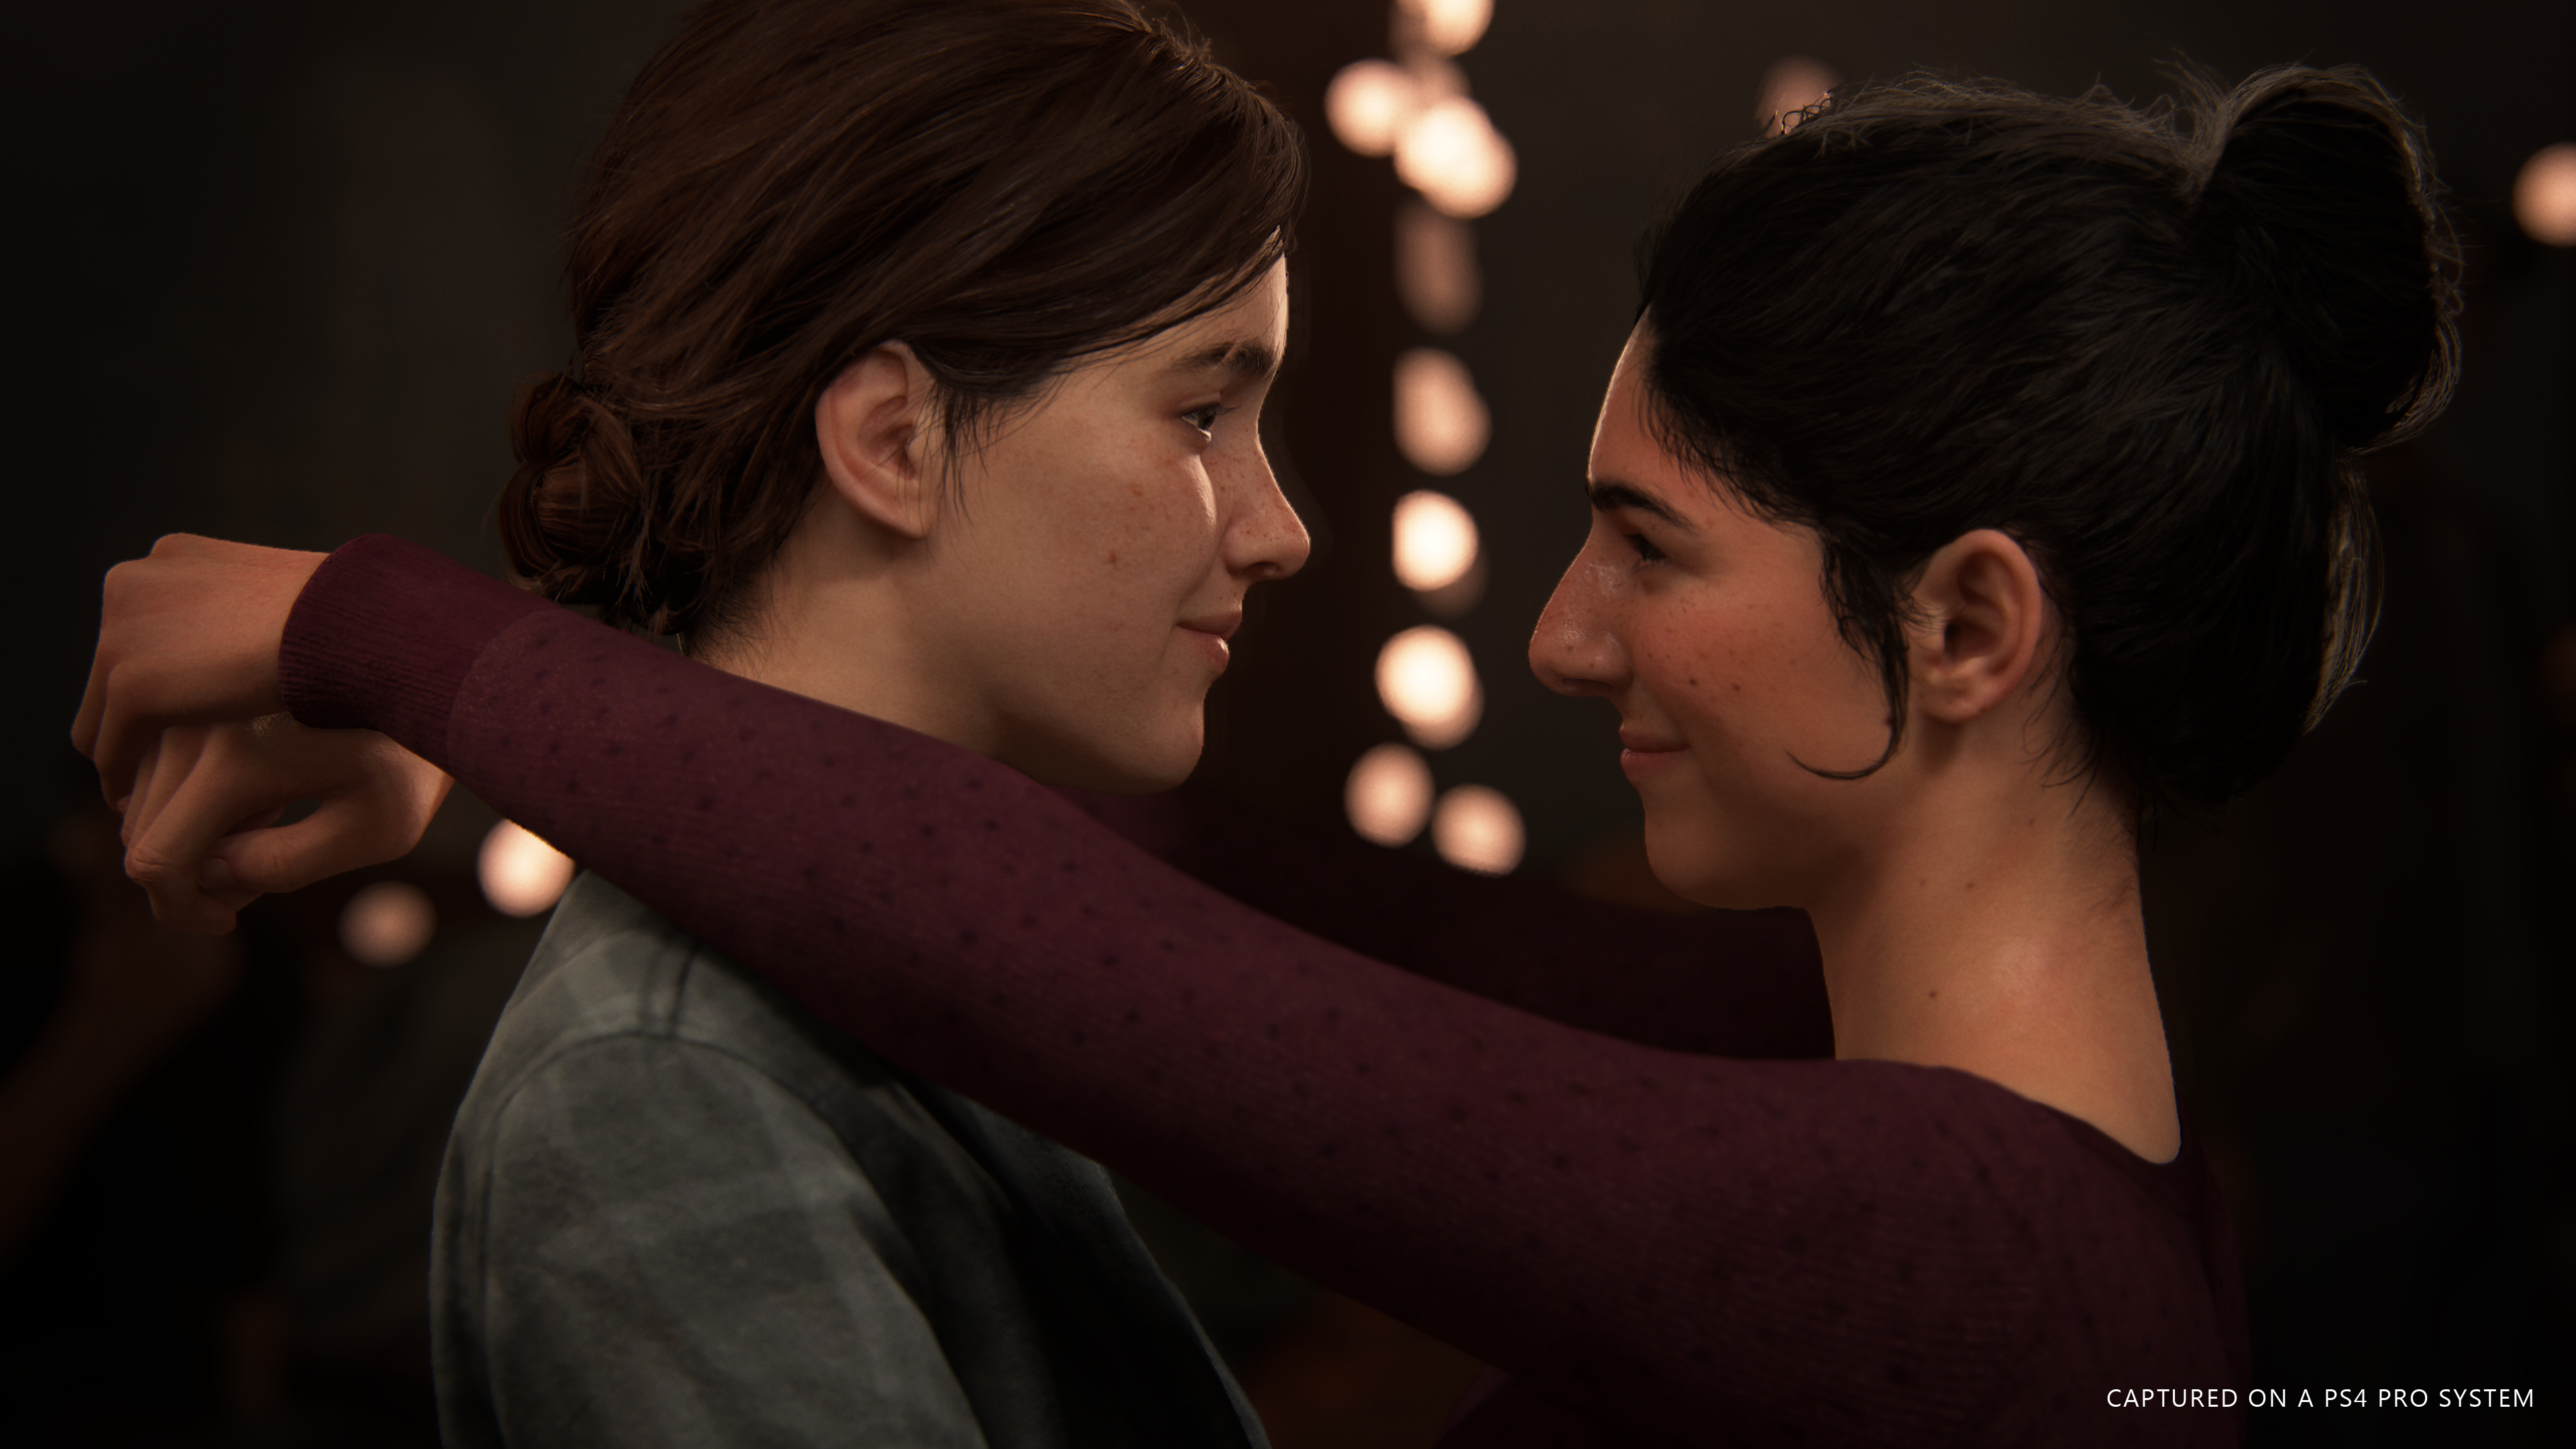 Naughty Dog's latest job listing may hint at The Last of Us Part